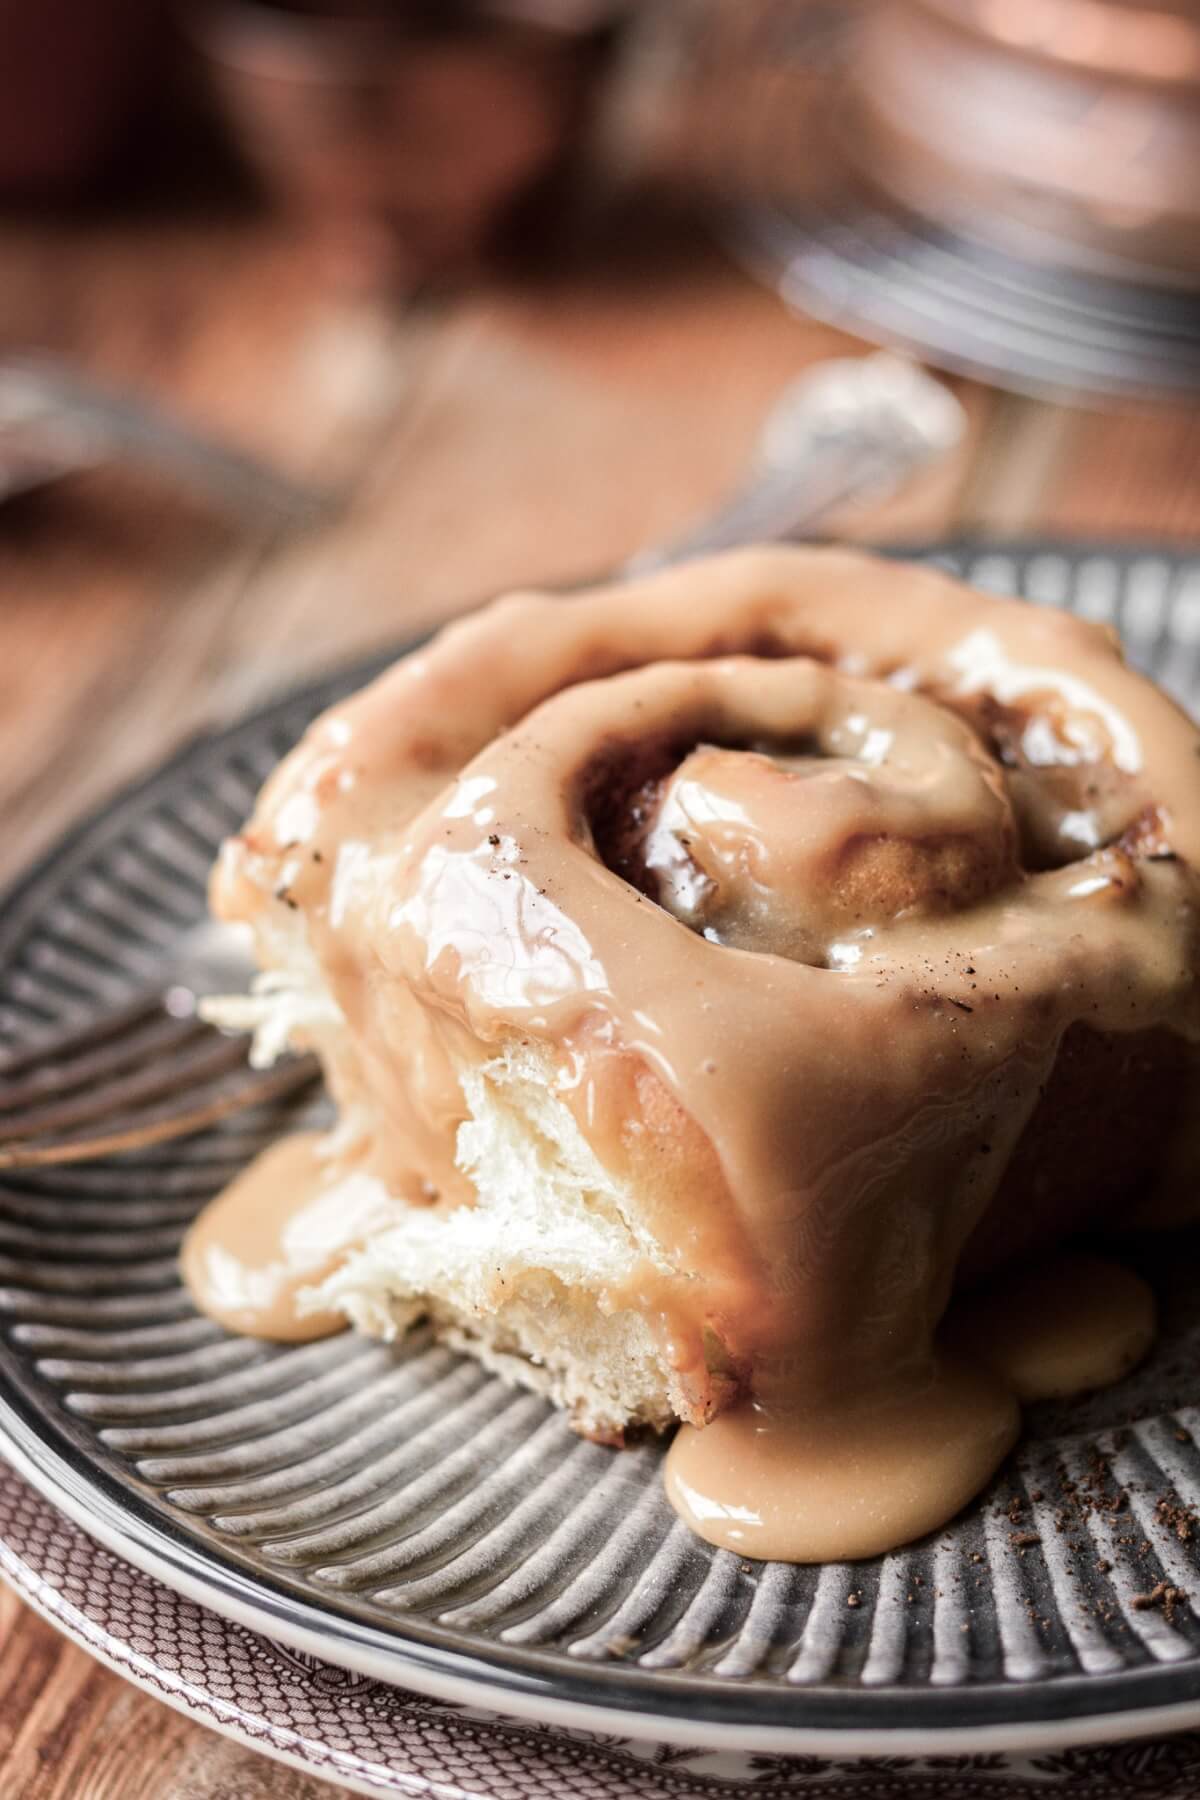 Apple pie cinnamon roll with caramel icing dripping onto a plate.